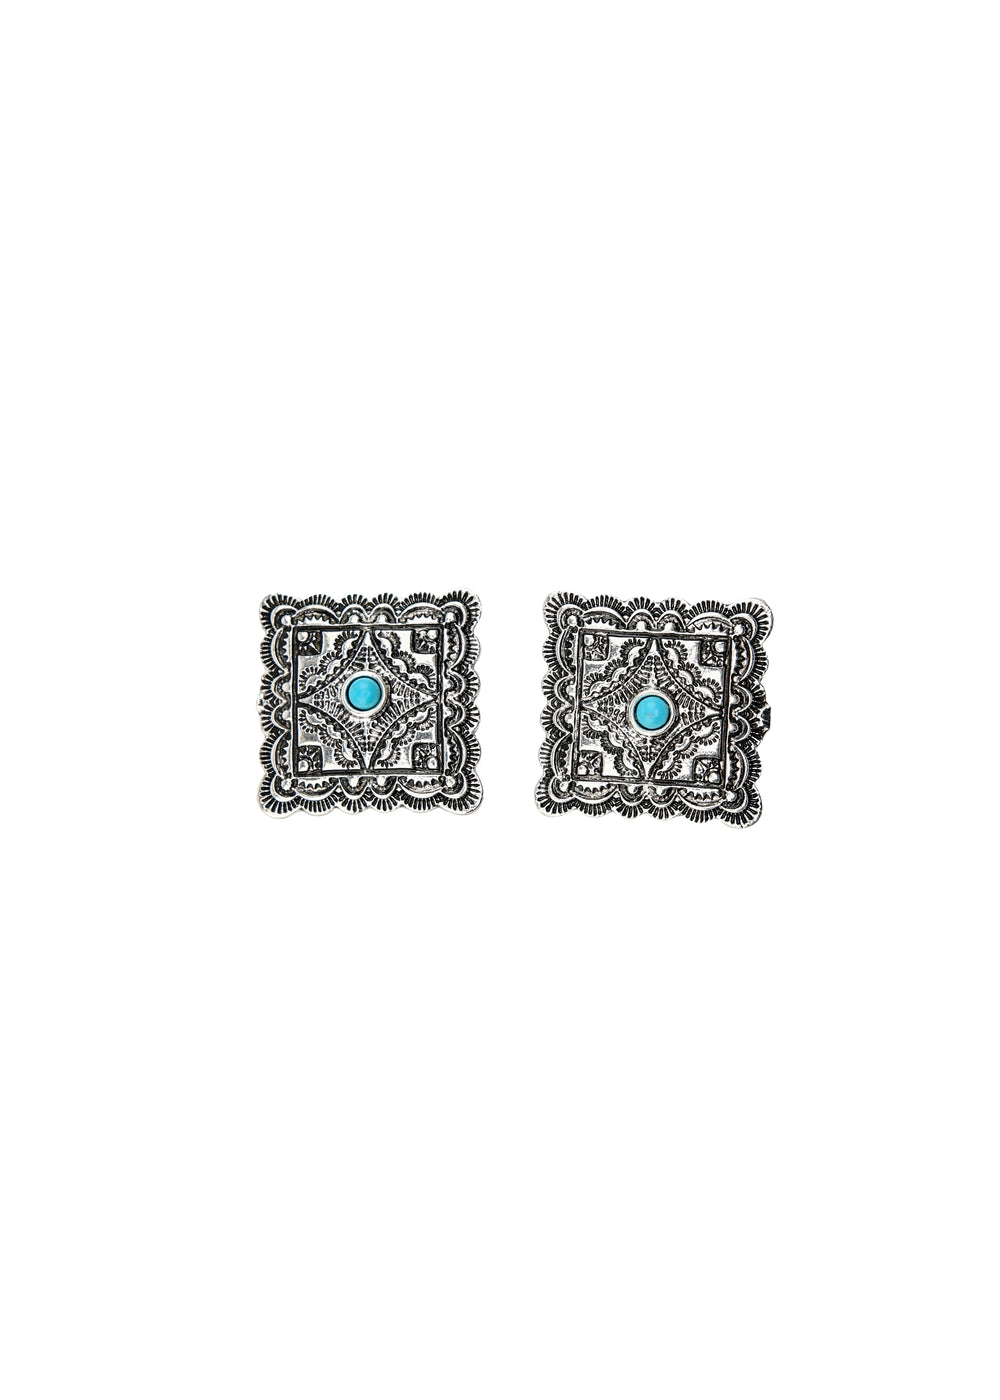 1" Burnished Silver Square Stamped Post Earrings with Turquoise Accent